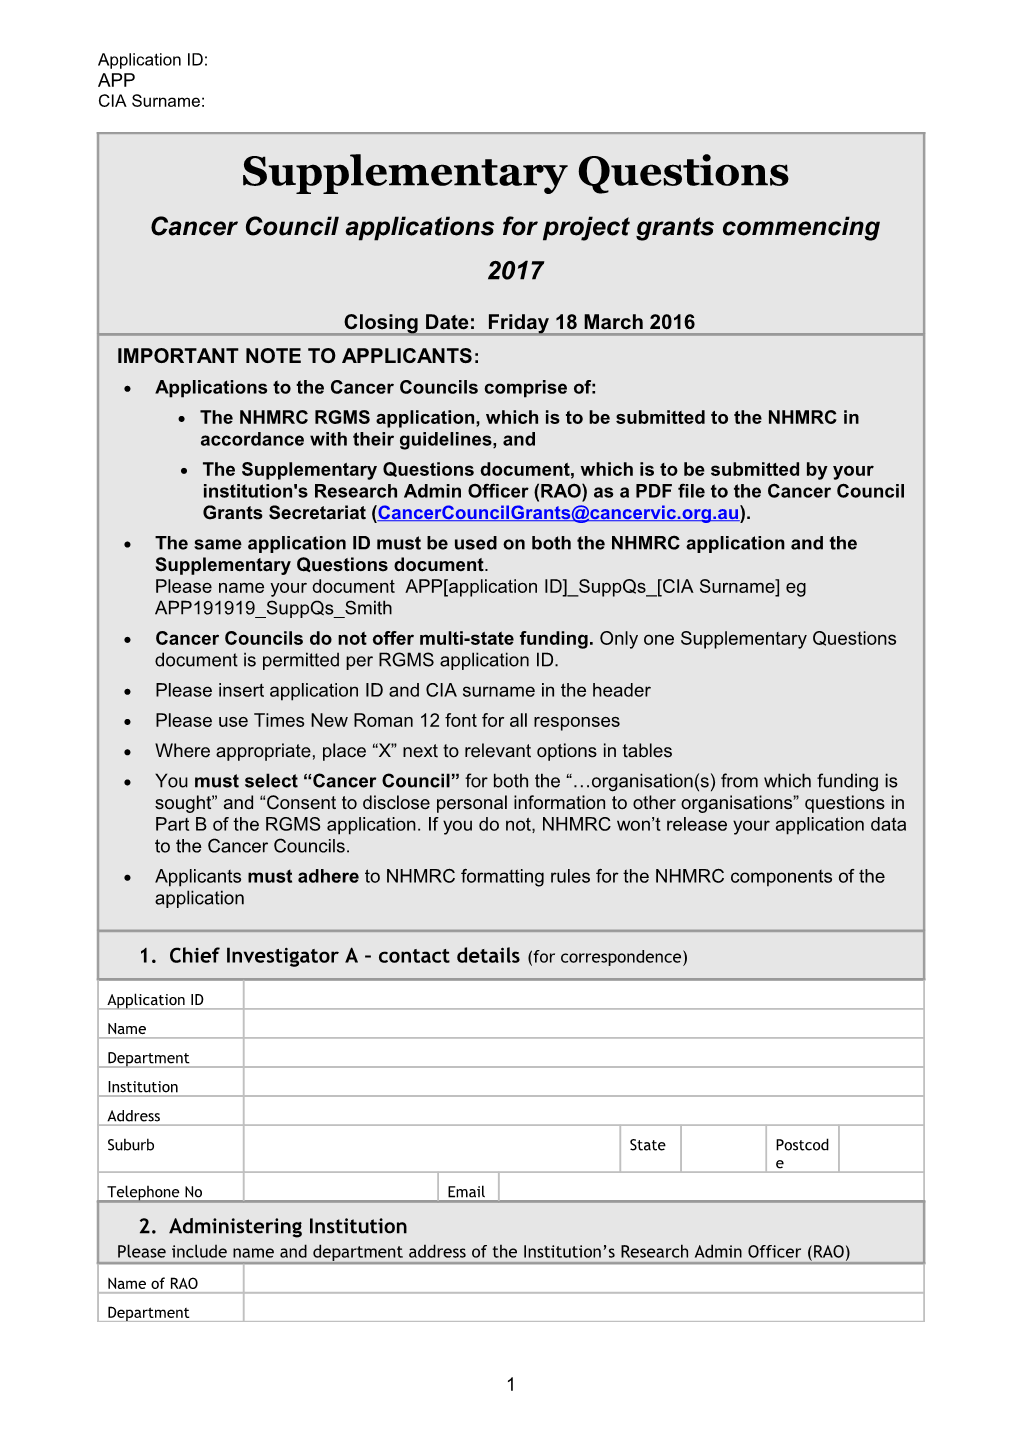 Applications to the Cancer Councils Comprise Of